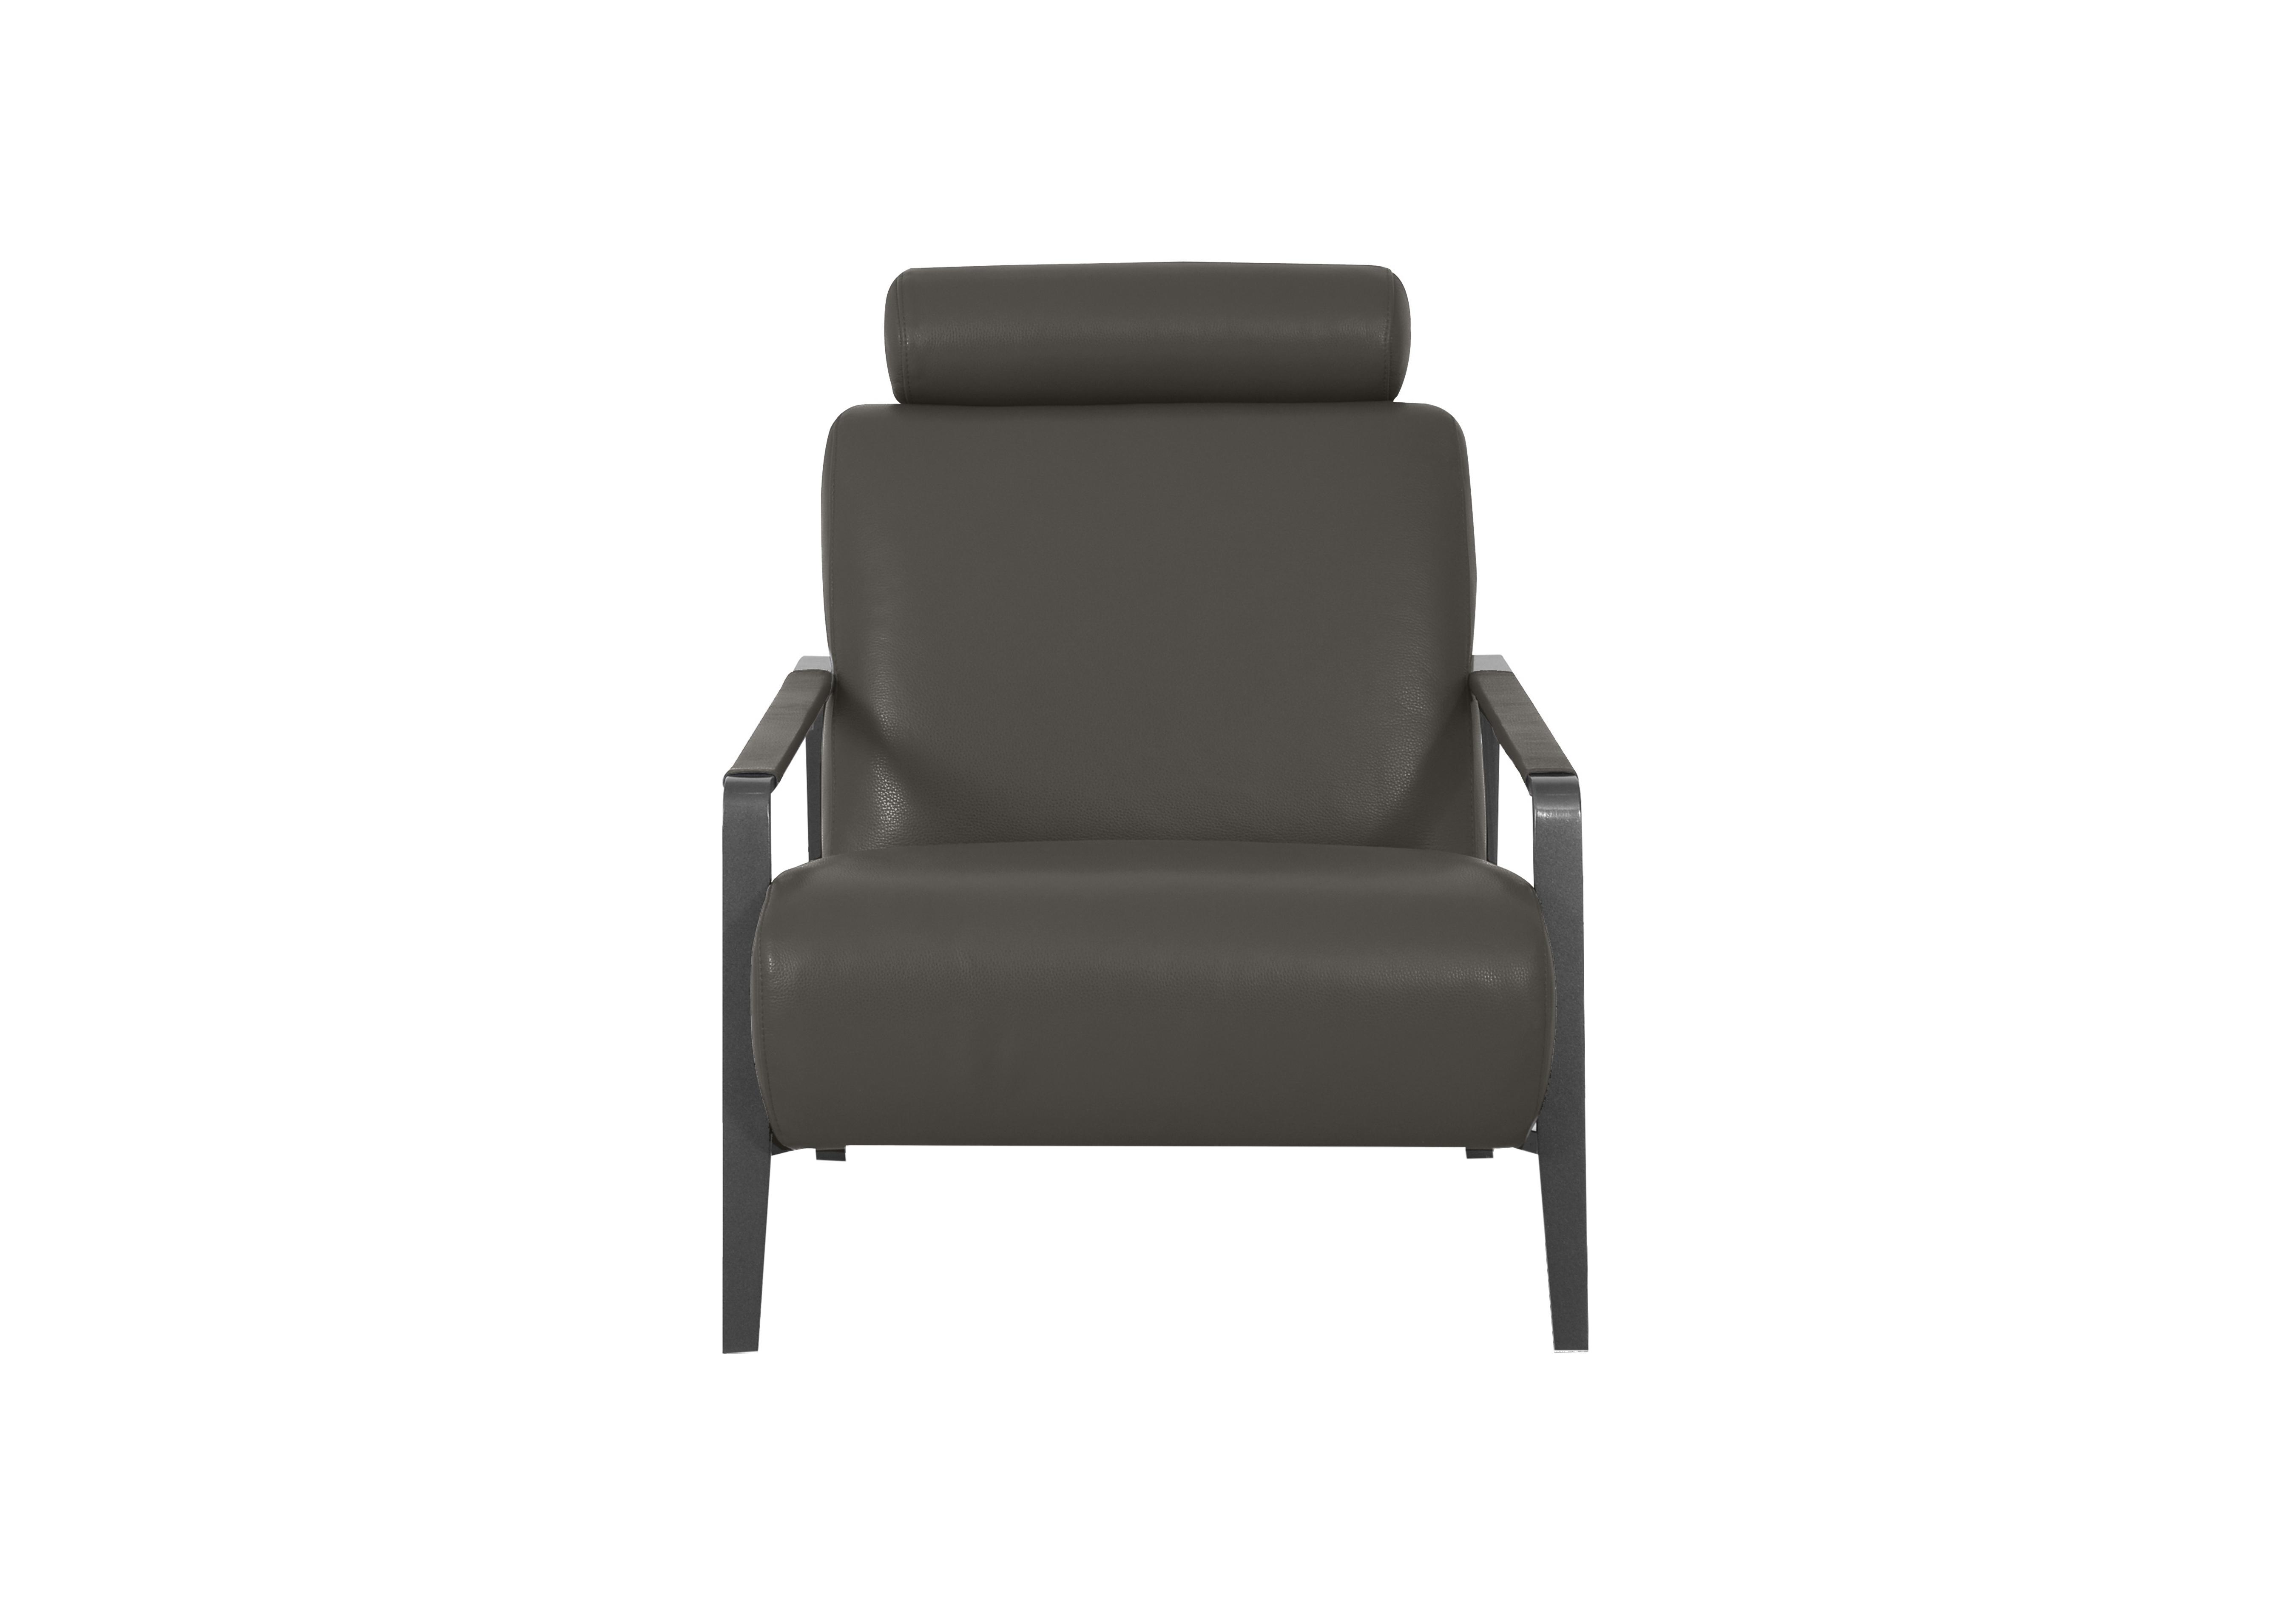 Lawson Leather Accent Chair in Nn-515e Elephant Grey on Furniture Village